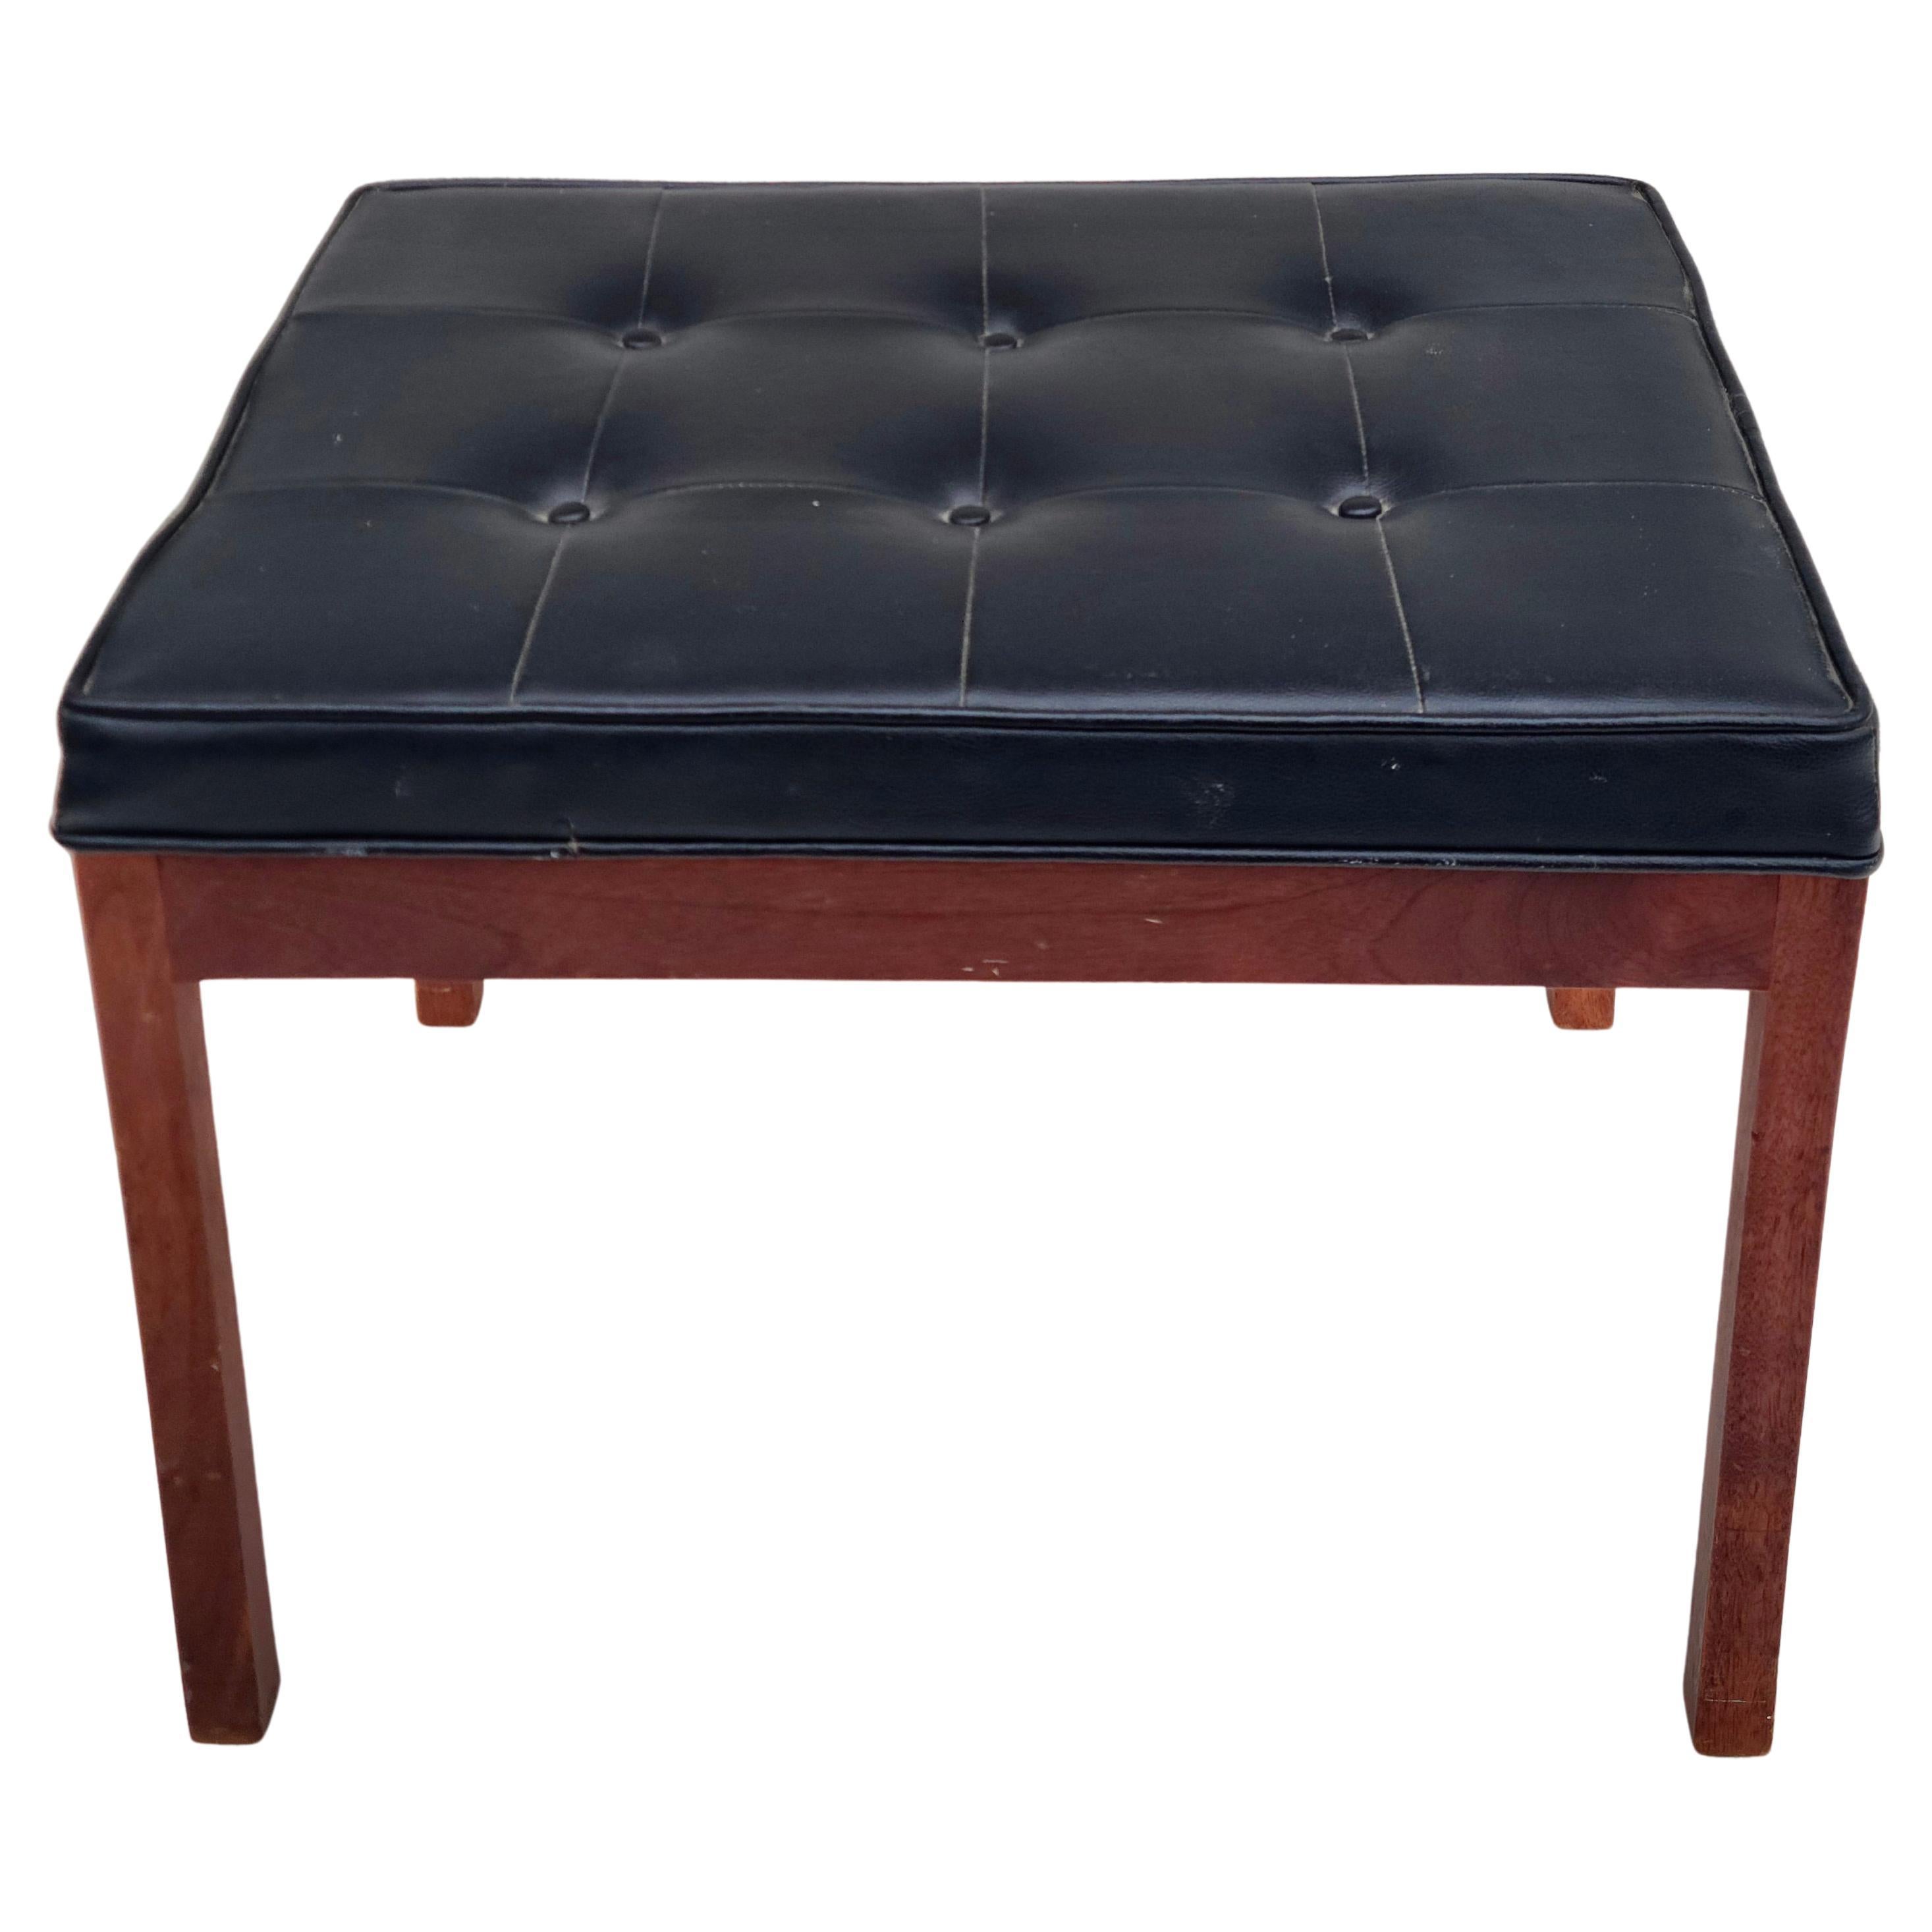 Please feel free to reach out for accurate shipping to your location.

Small mid century modern walnut and vinyl bench or ottoman.